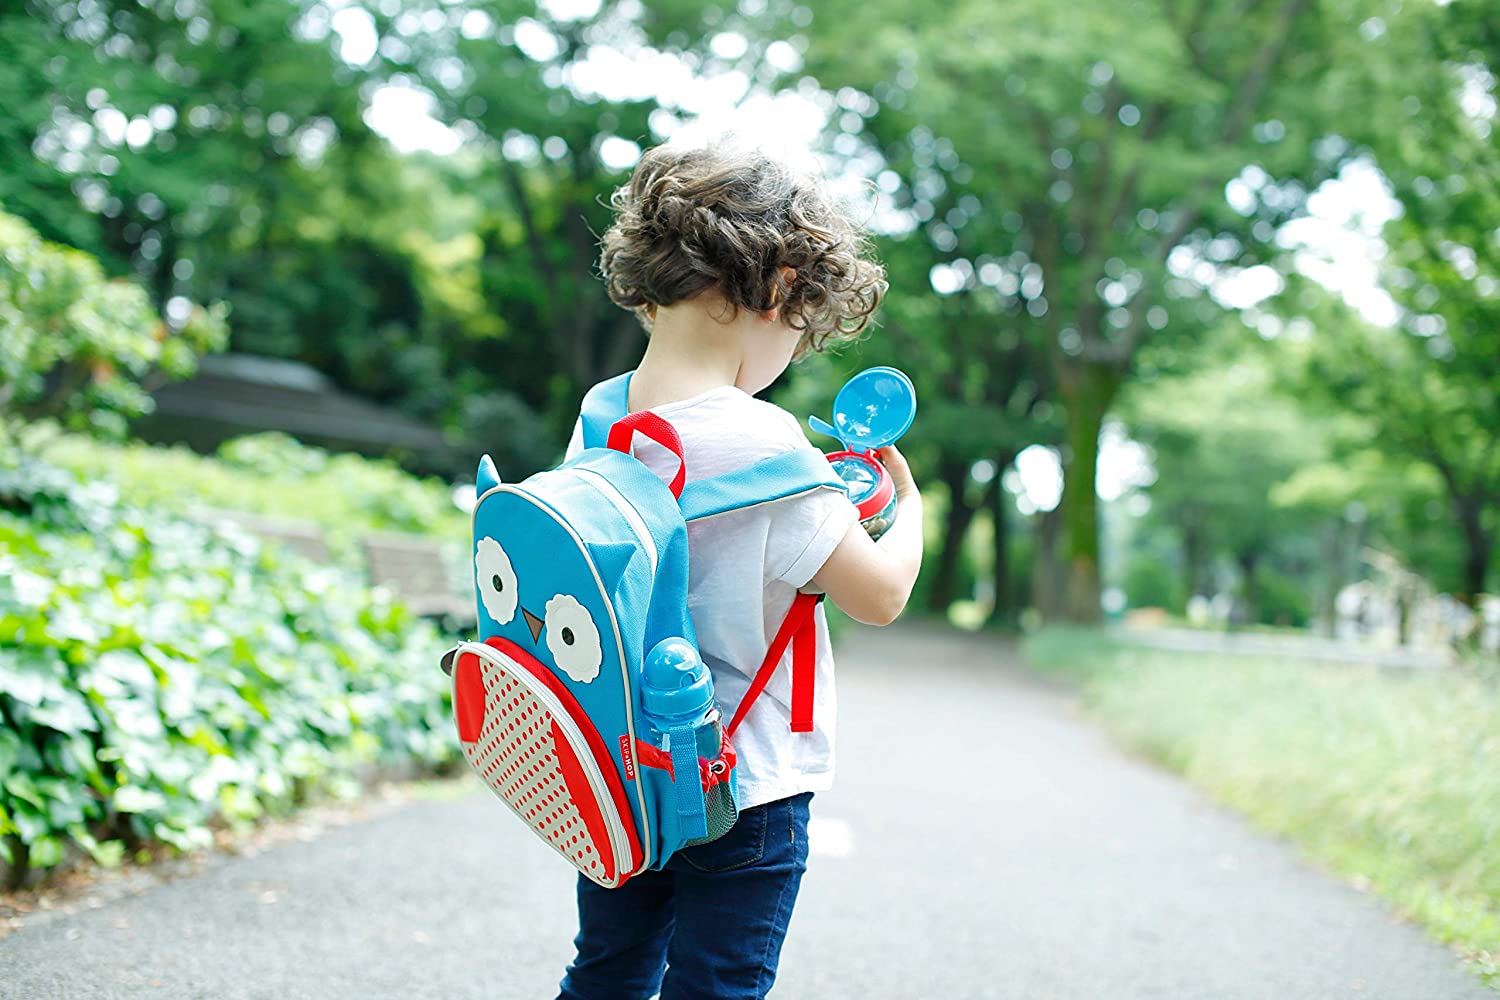 Skip Hop Zoo Little Kid Backpack, Owl for Kids Ages 3-6 Years